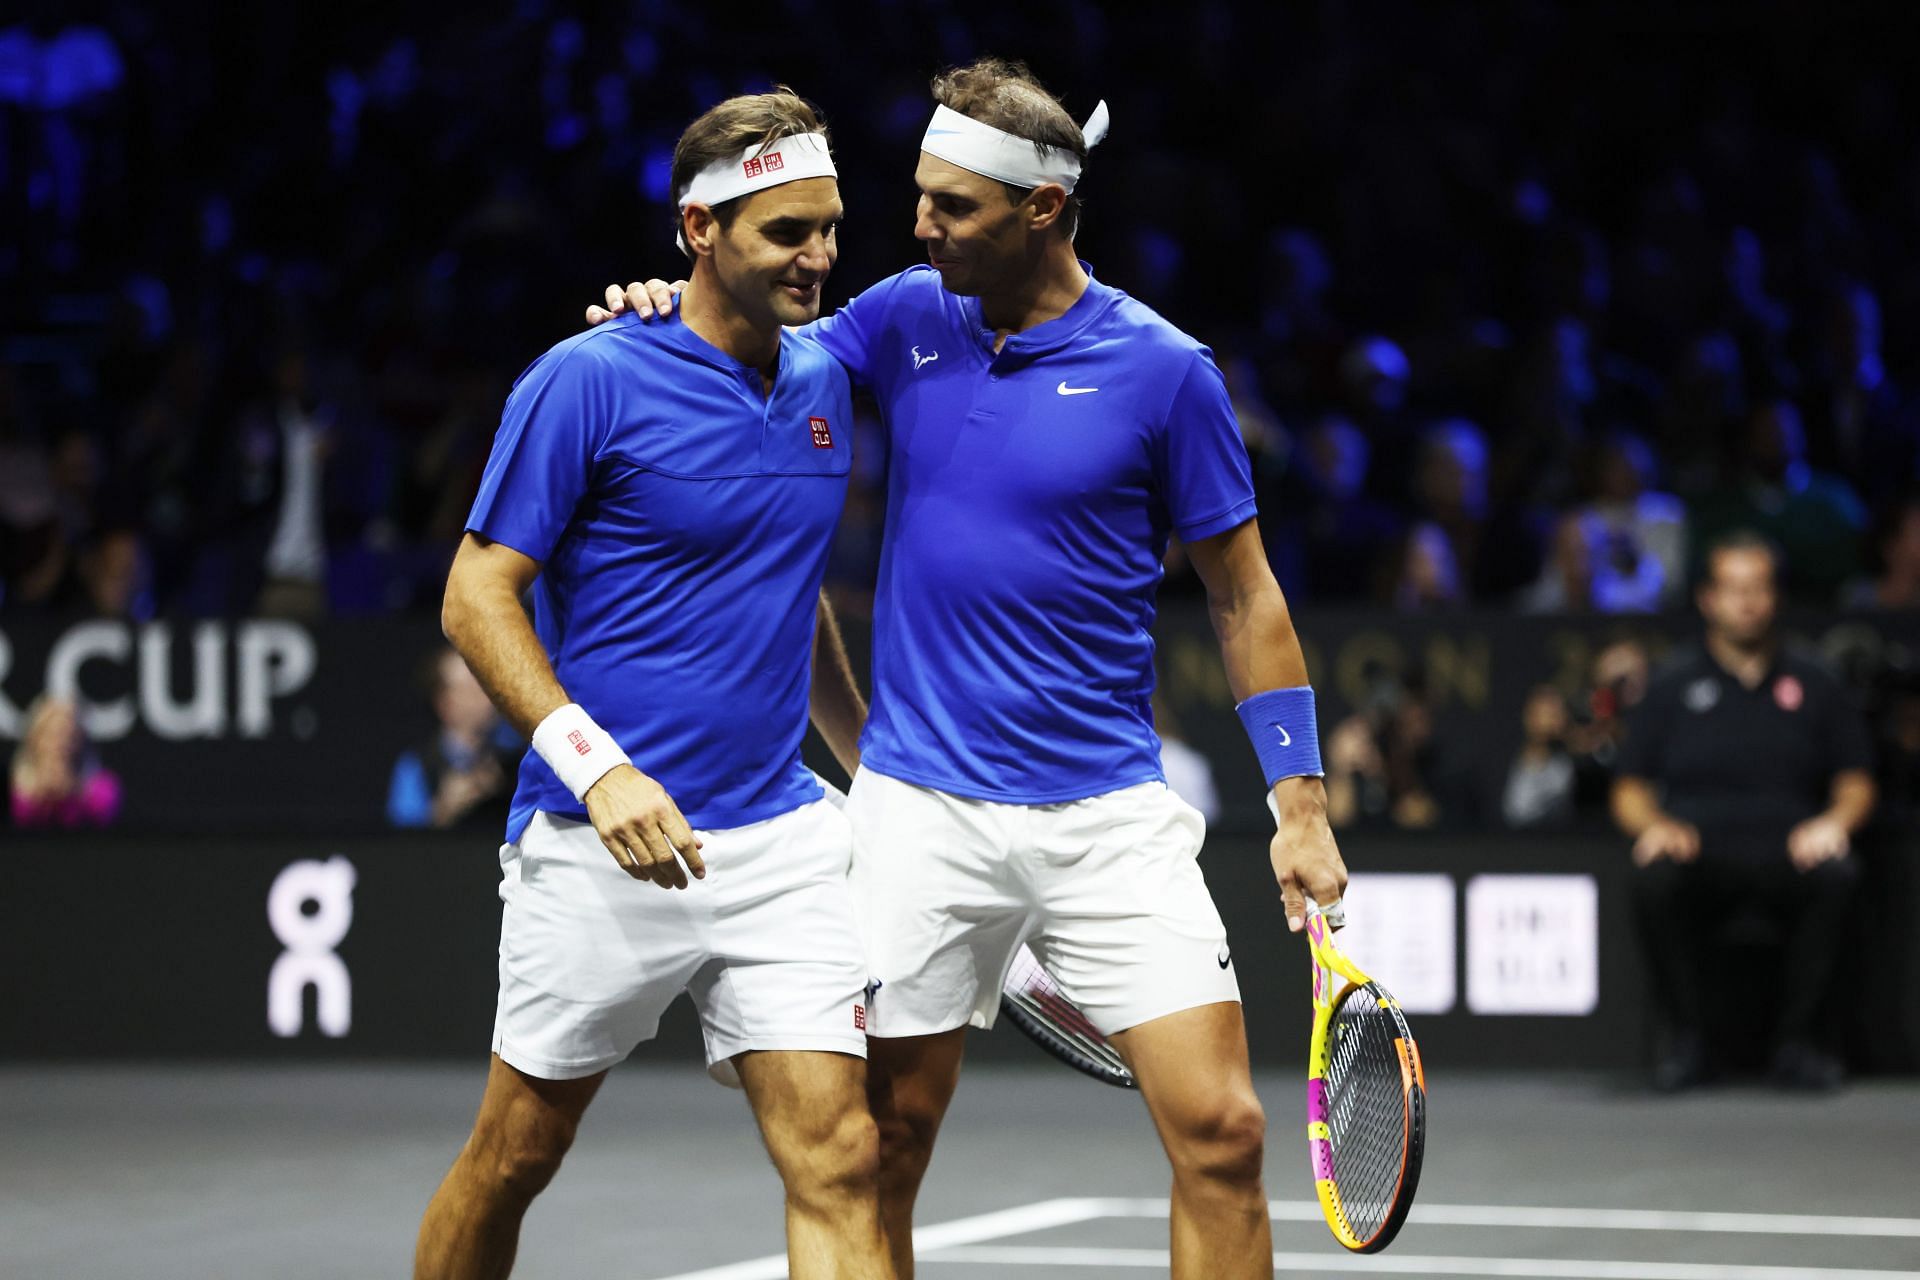 Federer and Nadal at Laver Cup 2022